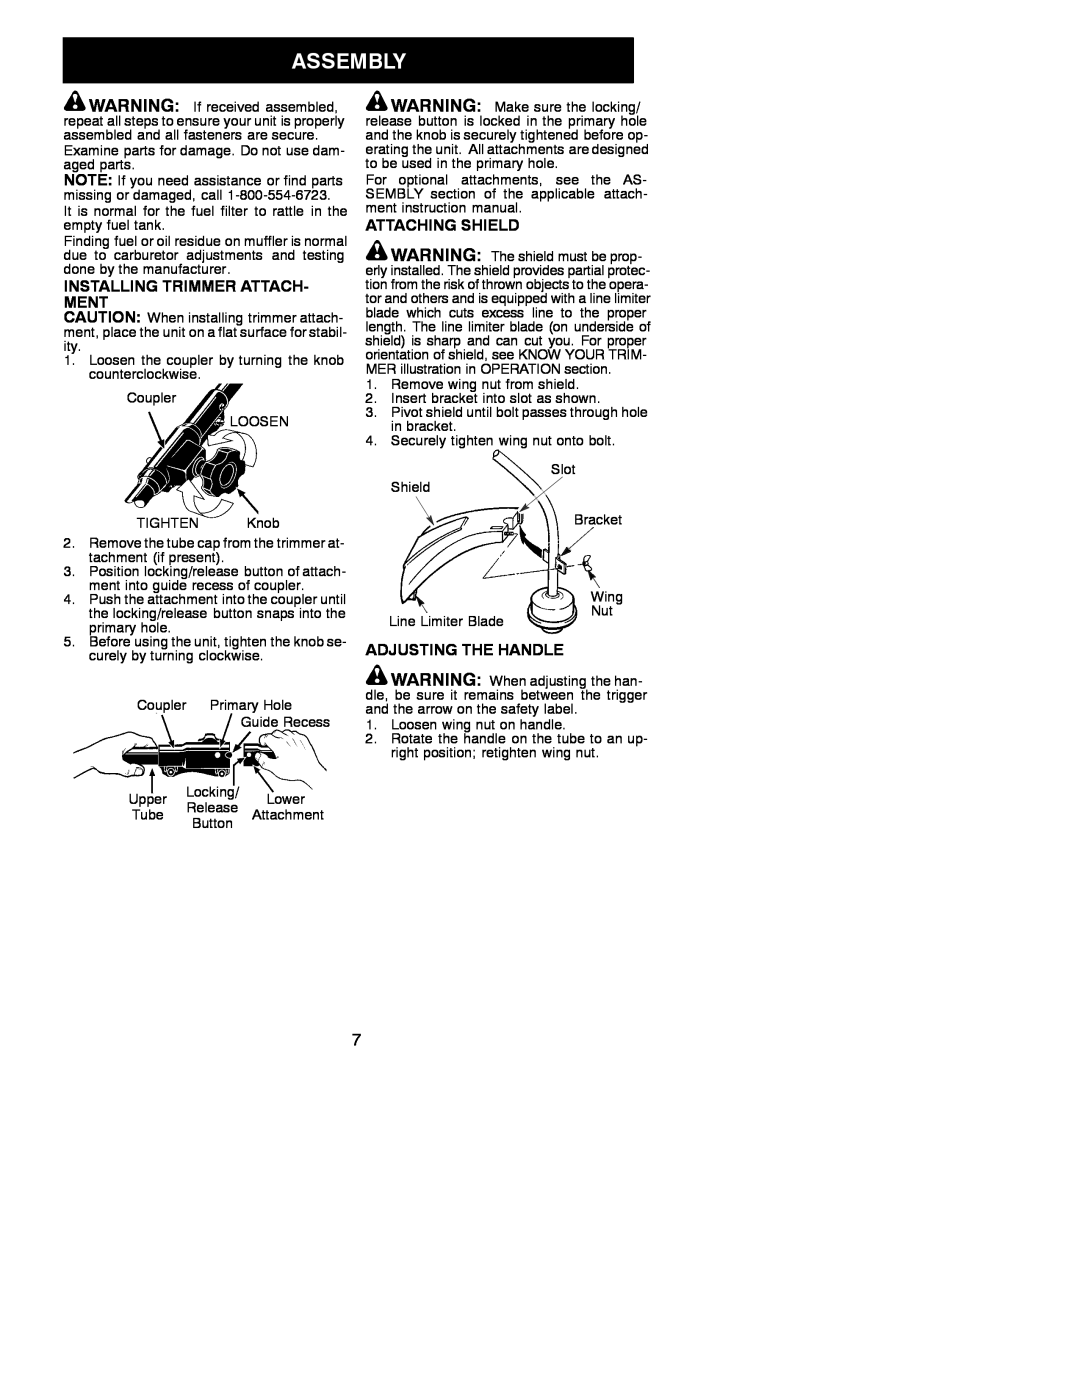 Poulan 530088155 instruction manual Installing Trimmer Attach- Ment, Attaching Shield, Adjusting The Handle 